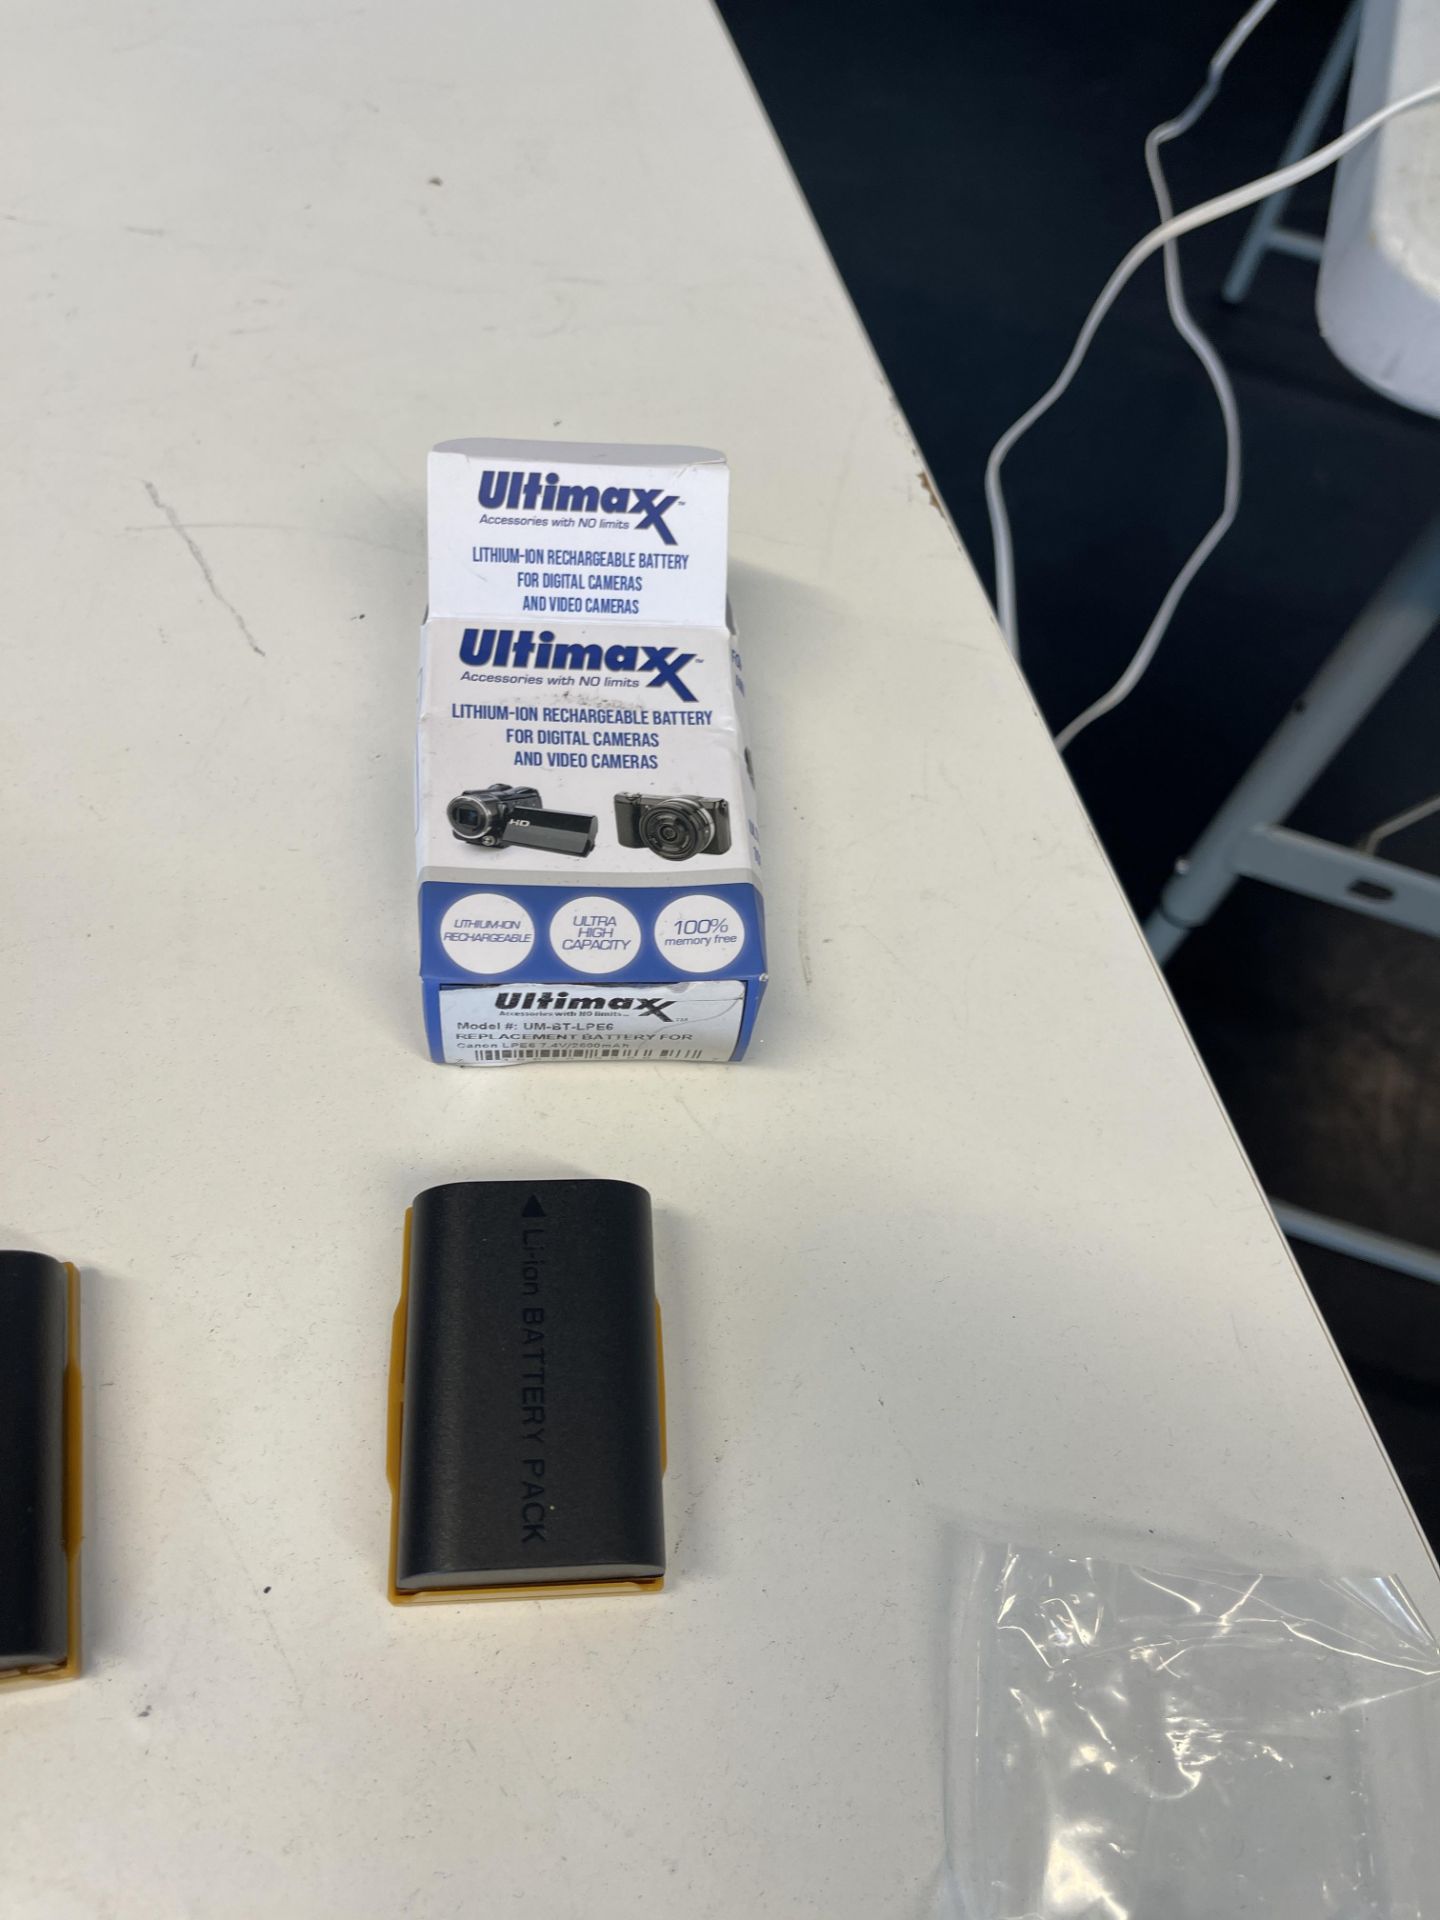 2: Ultimaxx Lithium-Ipn Rechargeable Battery for Digital Cameras - Image 6 of 6